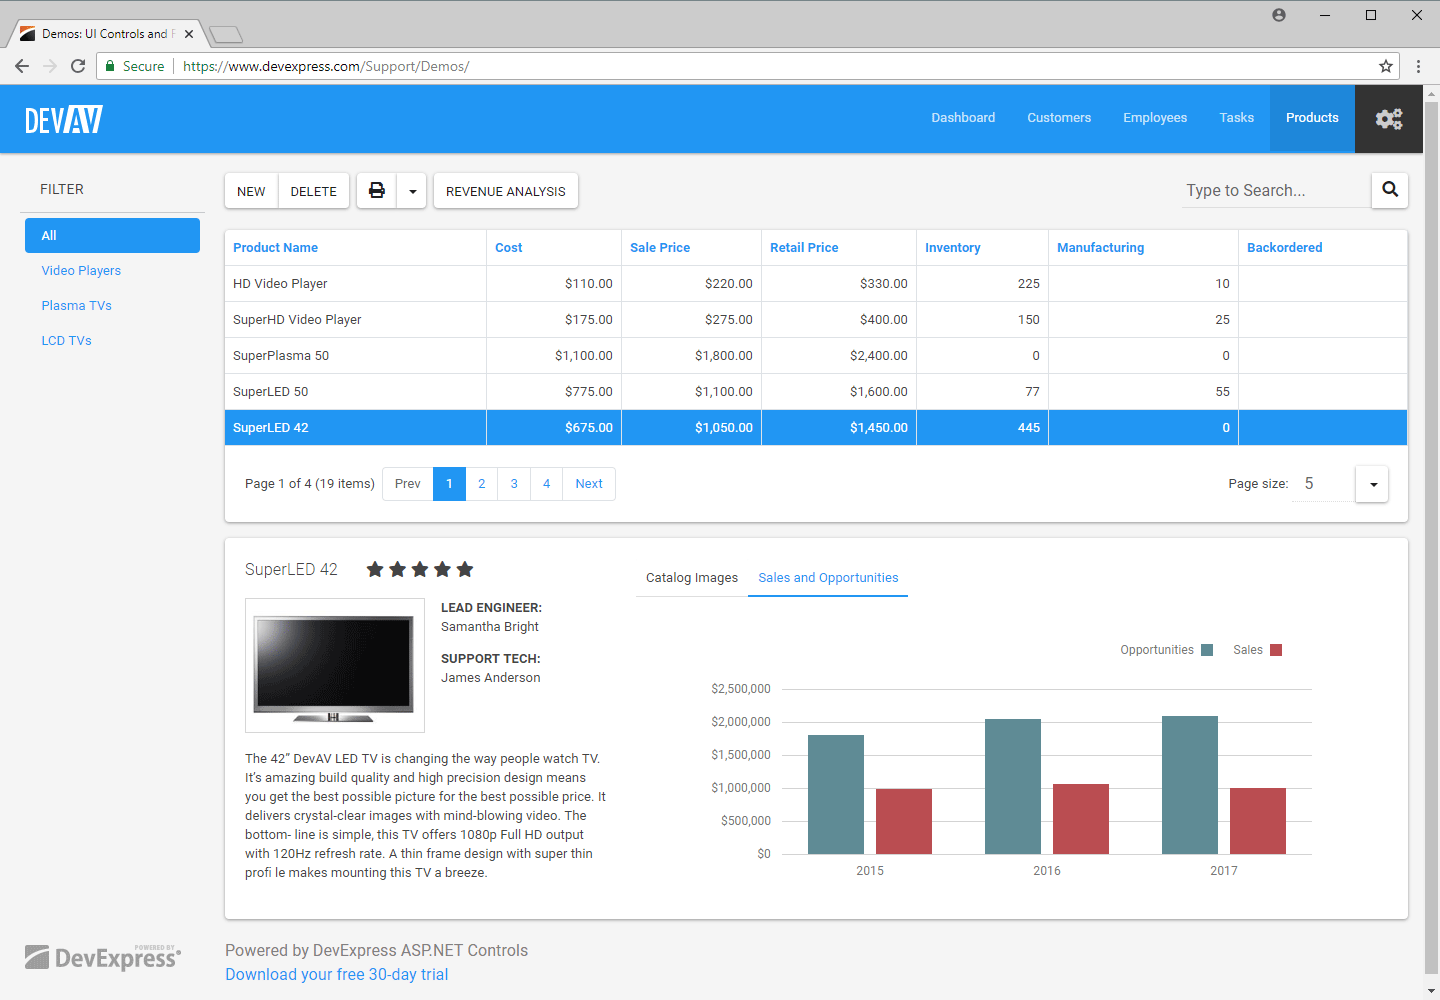 ASP.NET Bootstrap Web Forms App - Product Detail View